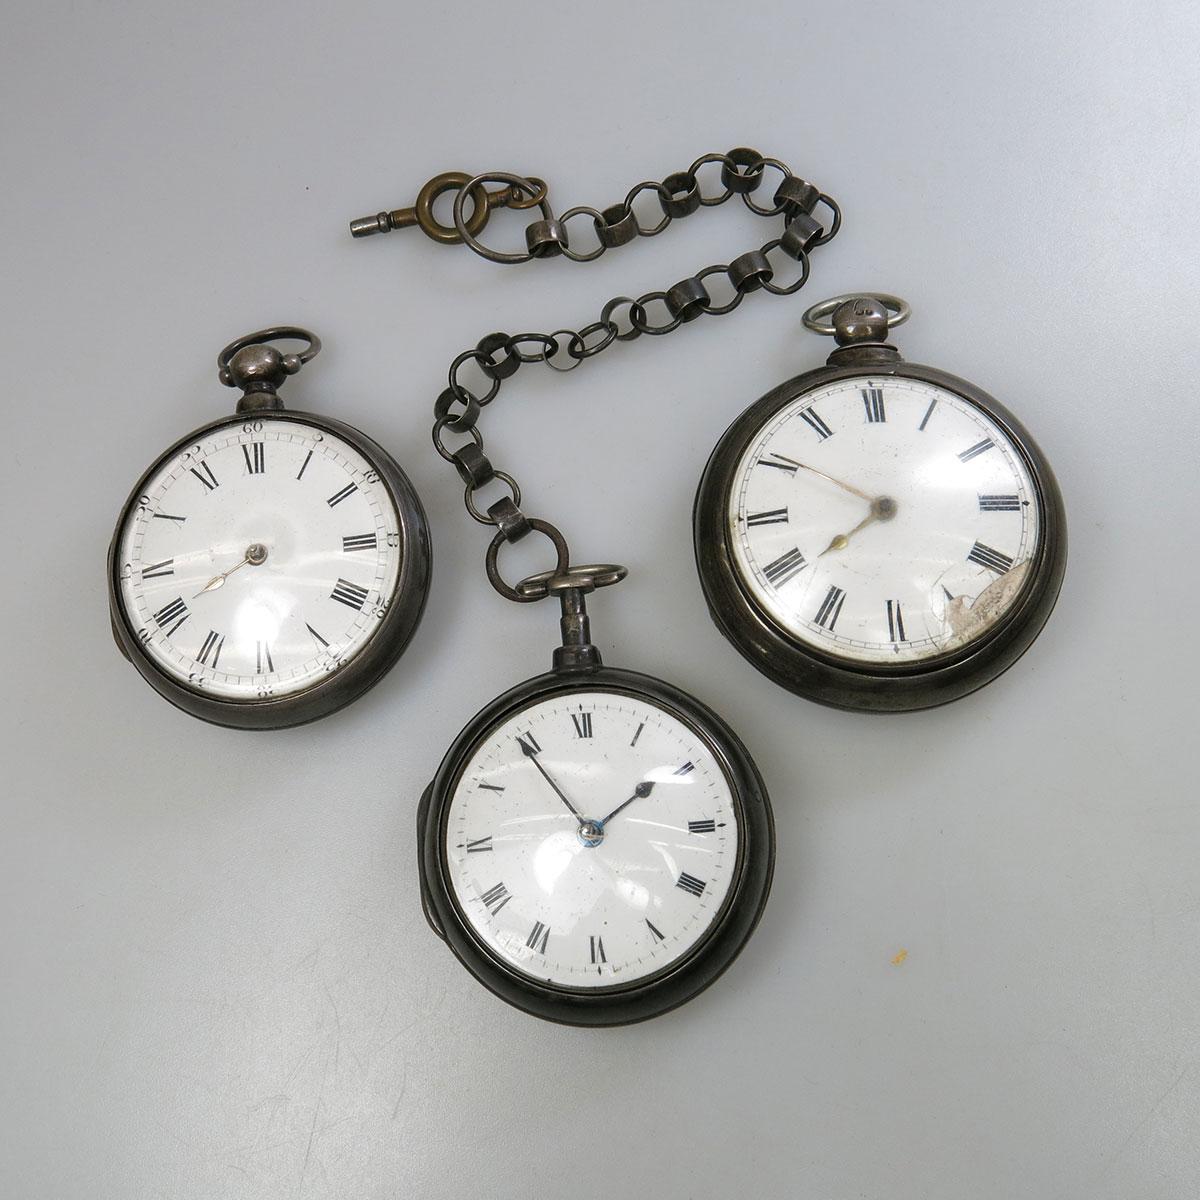 3 x Early 19th Century English Key Wind Pocket Watches